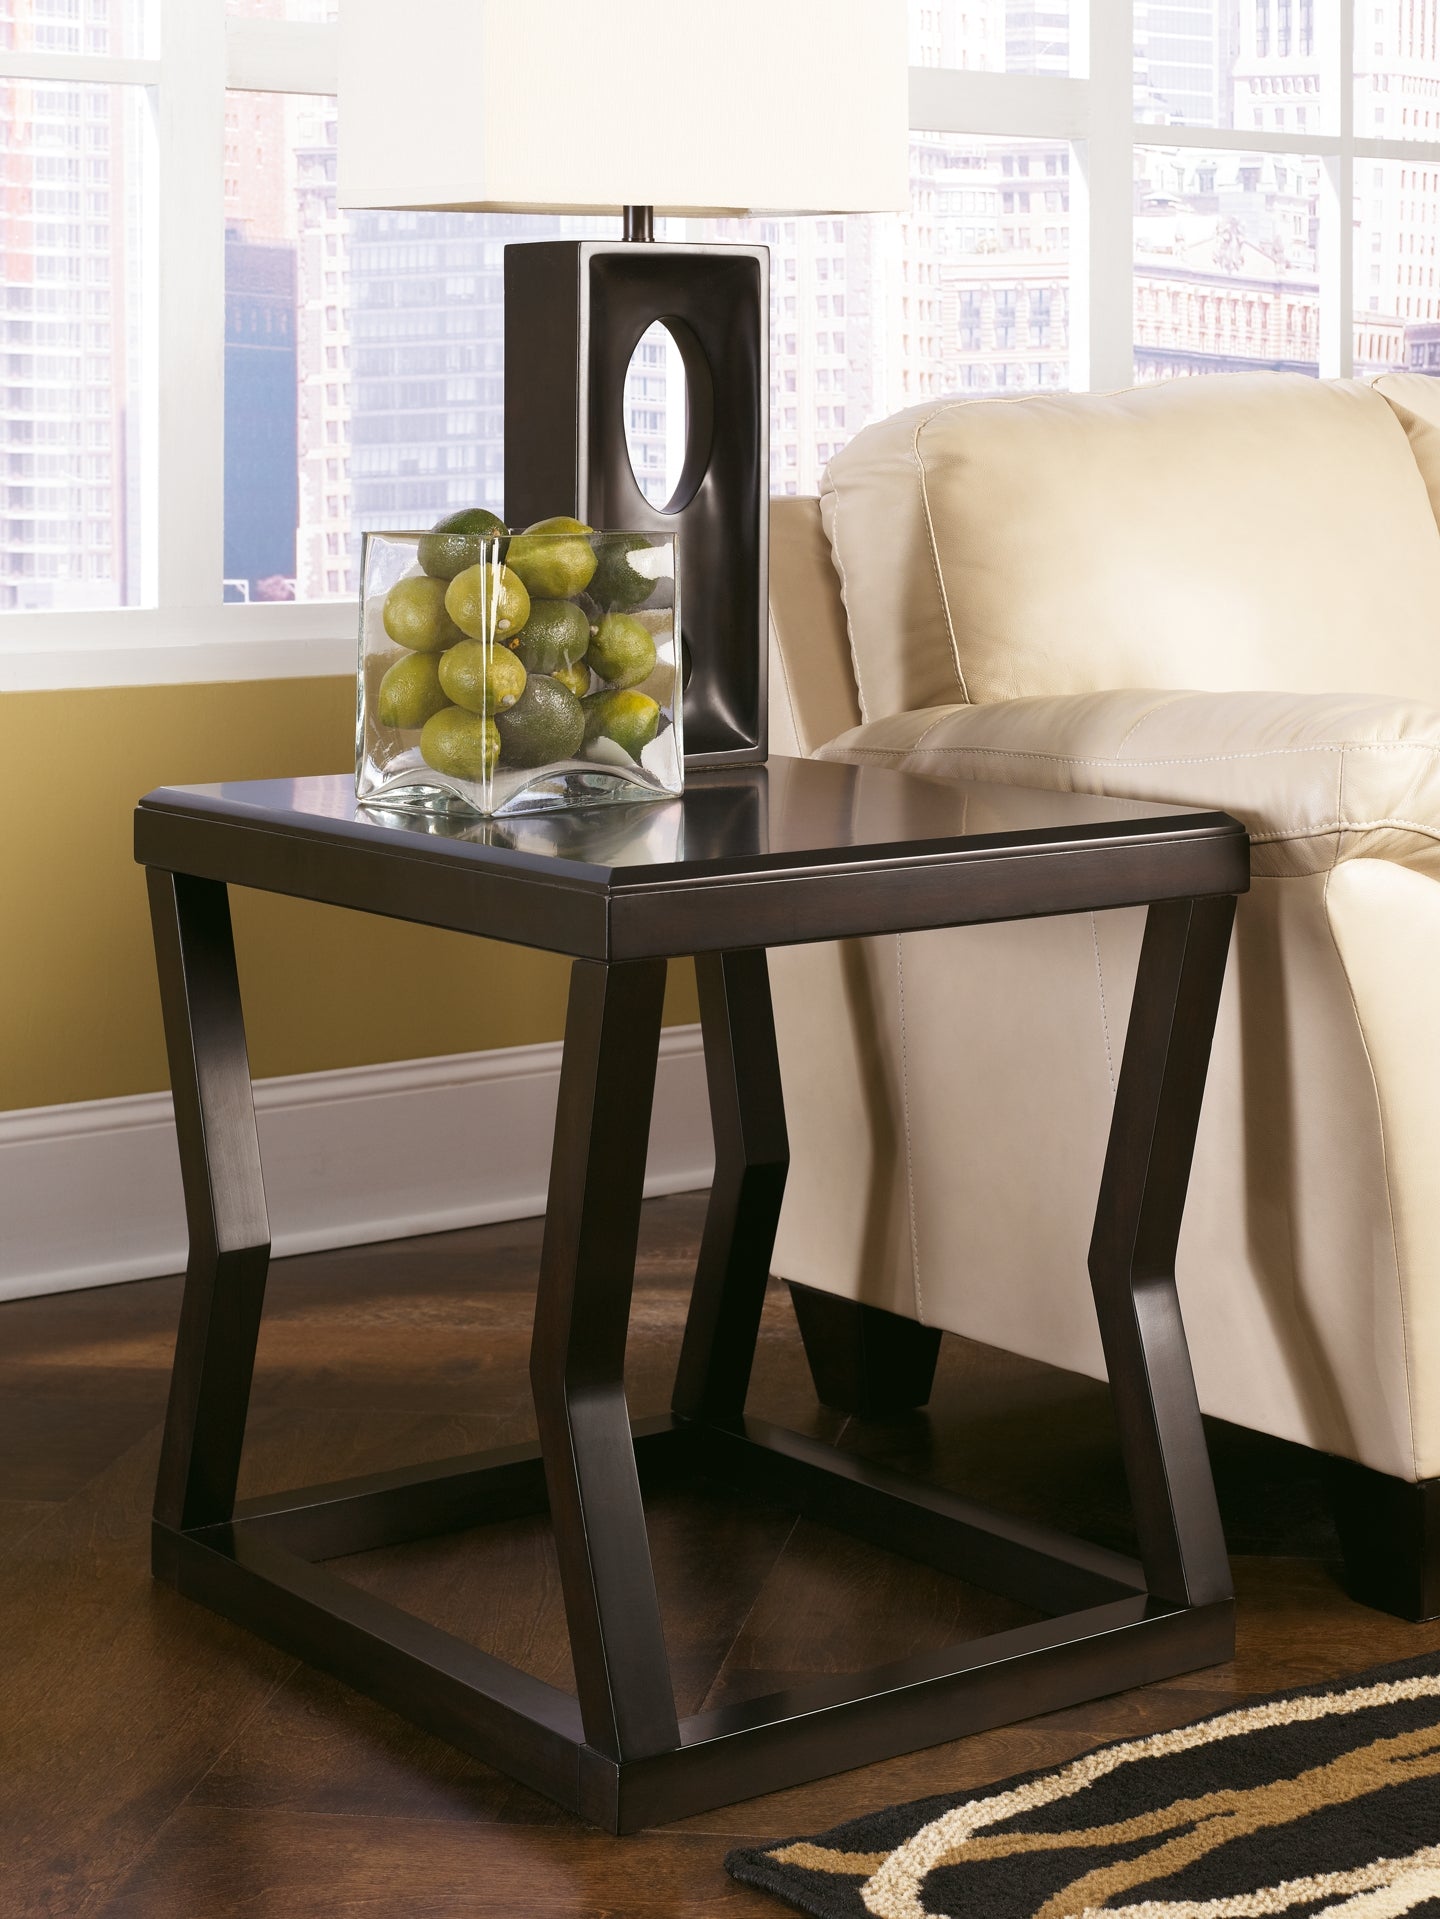 Kelton Rectangular End Table at Walker Mattress and Furniture Locations in Cedar Park and Belton TX.